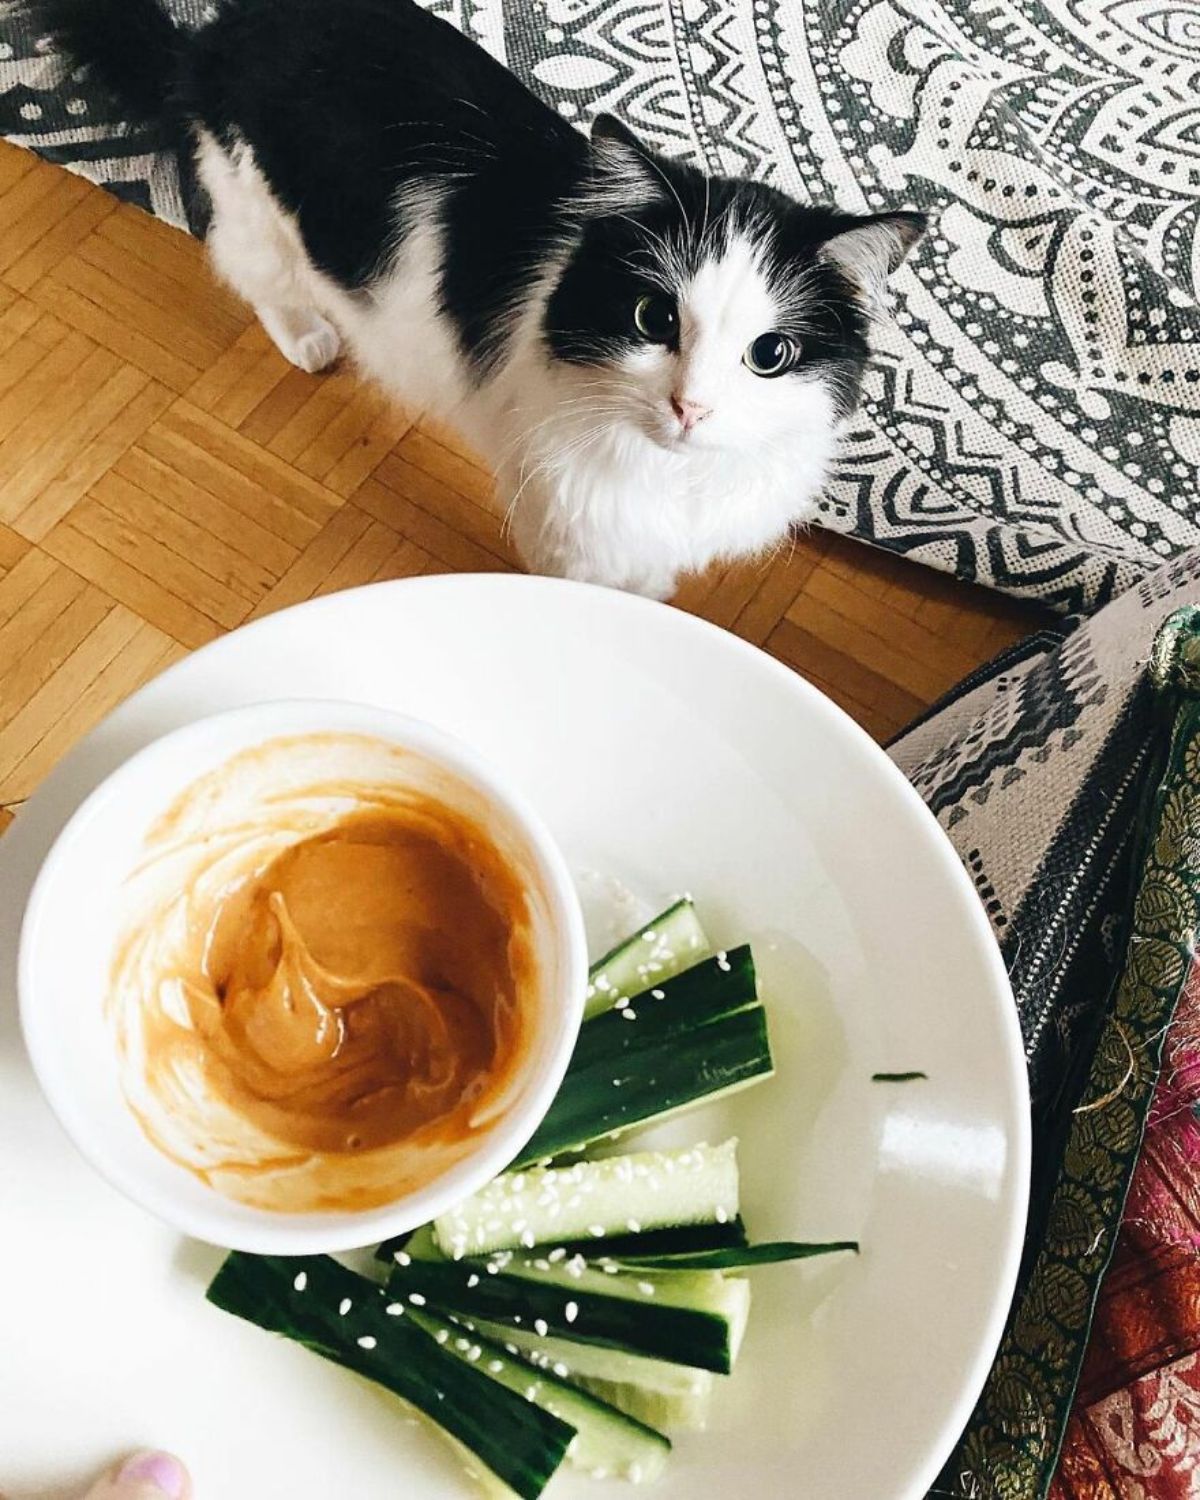 black and white fluffy cat standing under someone holding a white plate of sliced cucumbers next to a bowl of brown sauce